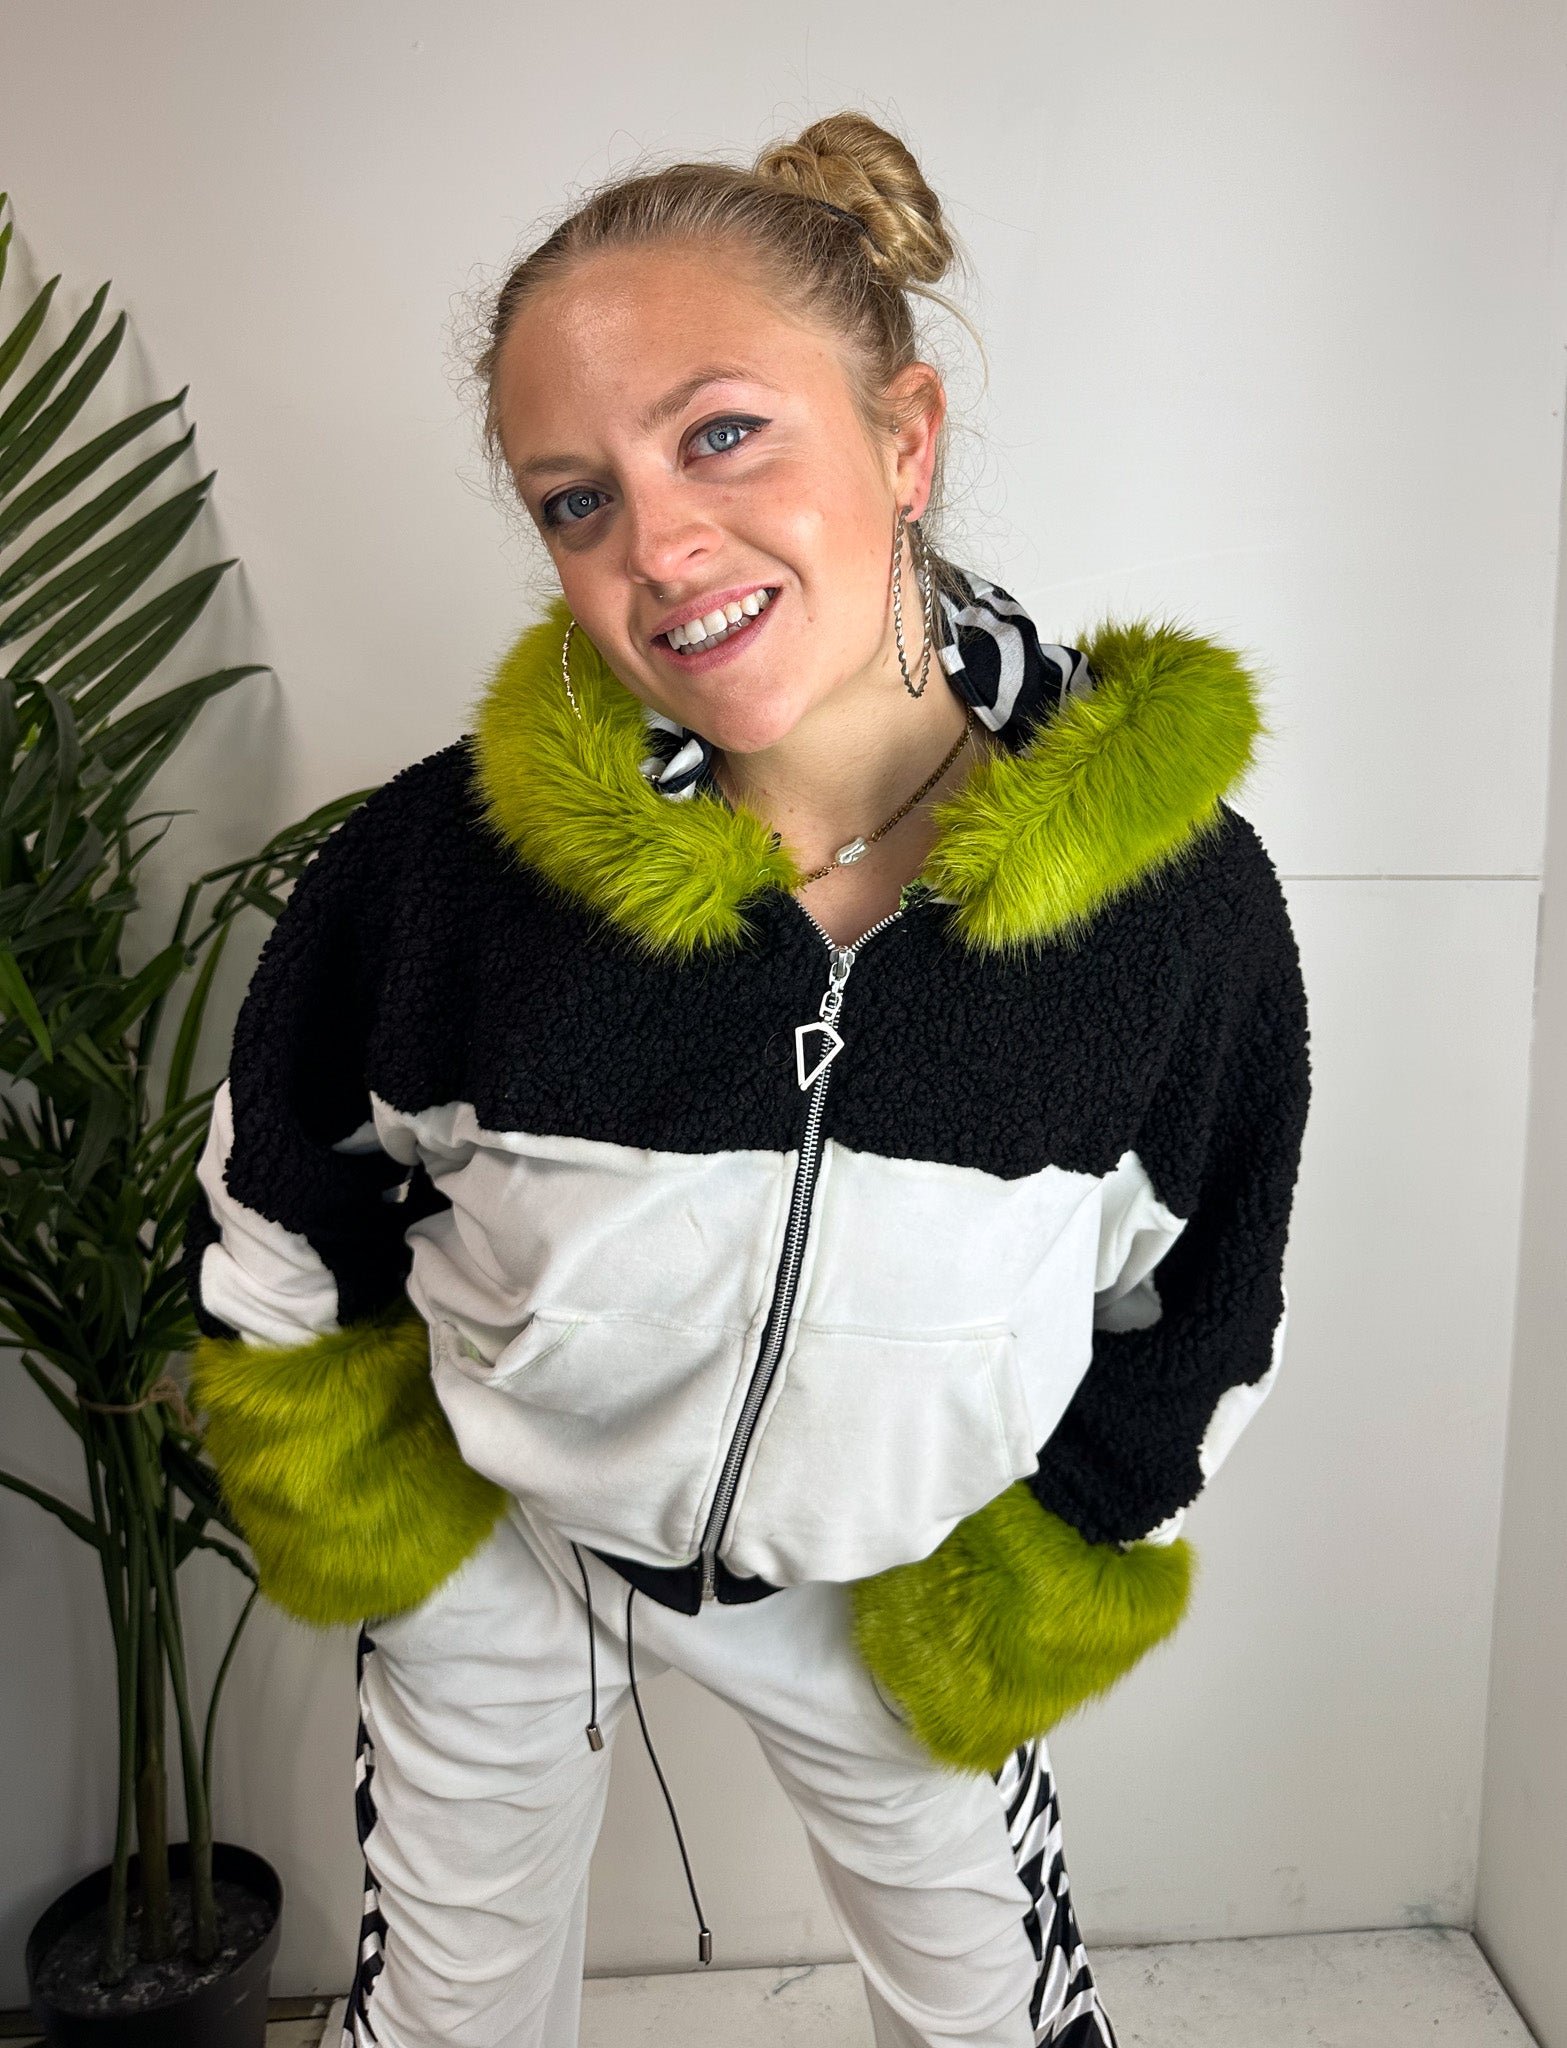 creatives of Bristol: independent fashion brand designer Bellisa x models: Bellisa X White and Black Velour Cropped Hoodie with Lime Green Faux Fur Cuffs and Hood. Unique summer fashion hoodie